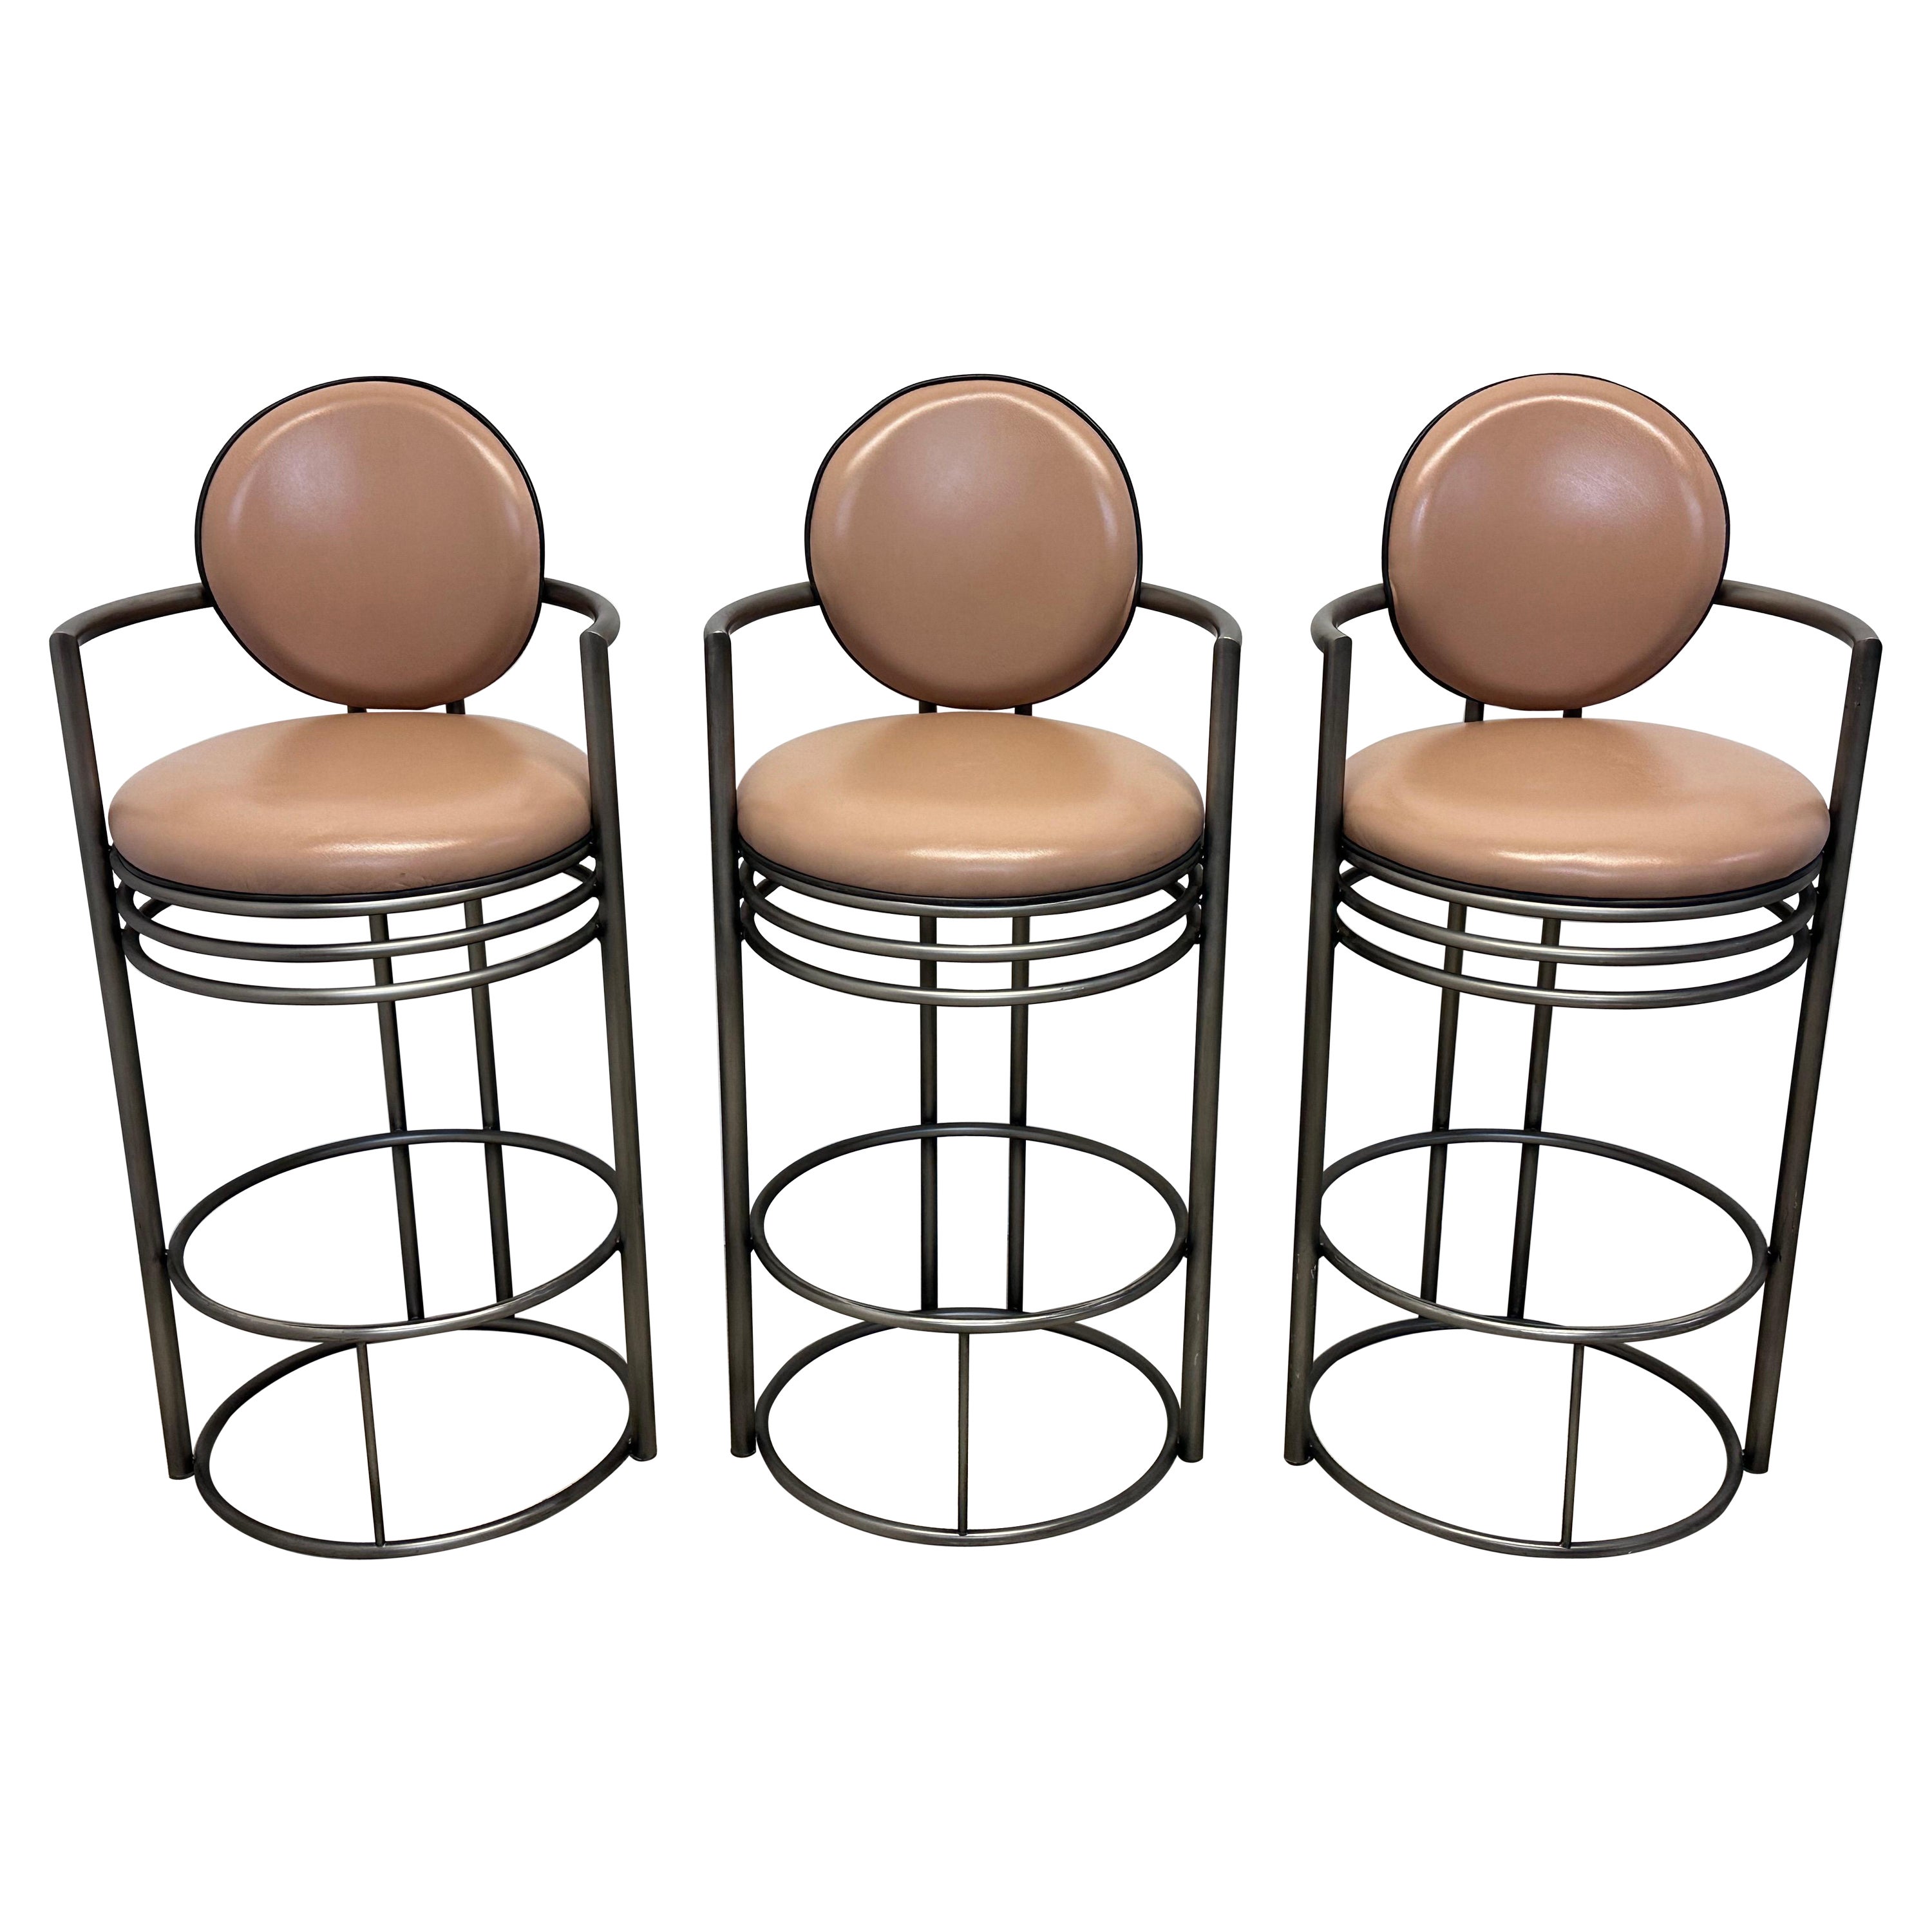 Design Institute America Deco Revival Bar Stools With Arms, 1980s - Set of Three For Sale